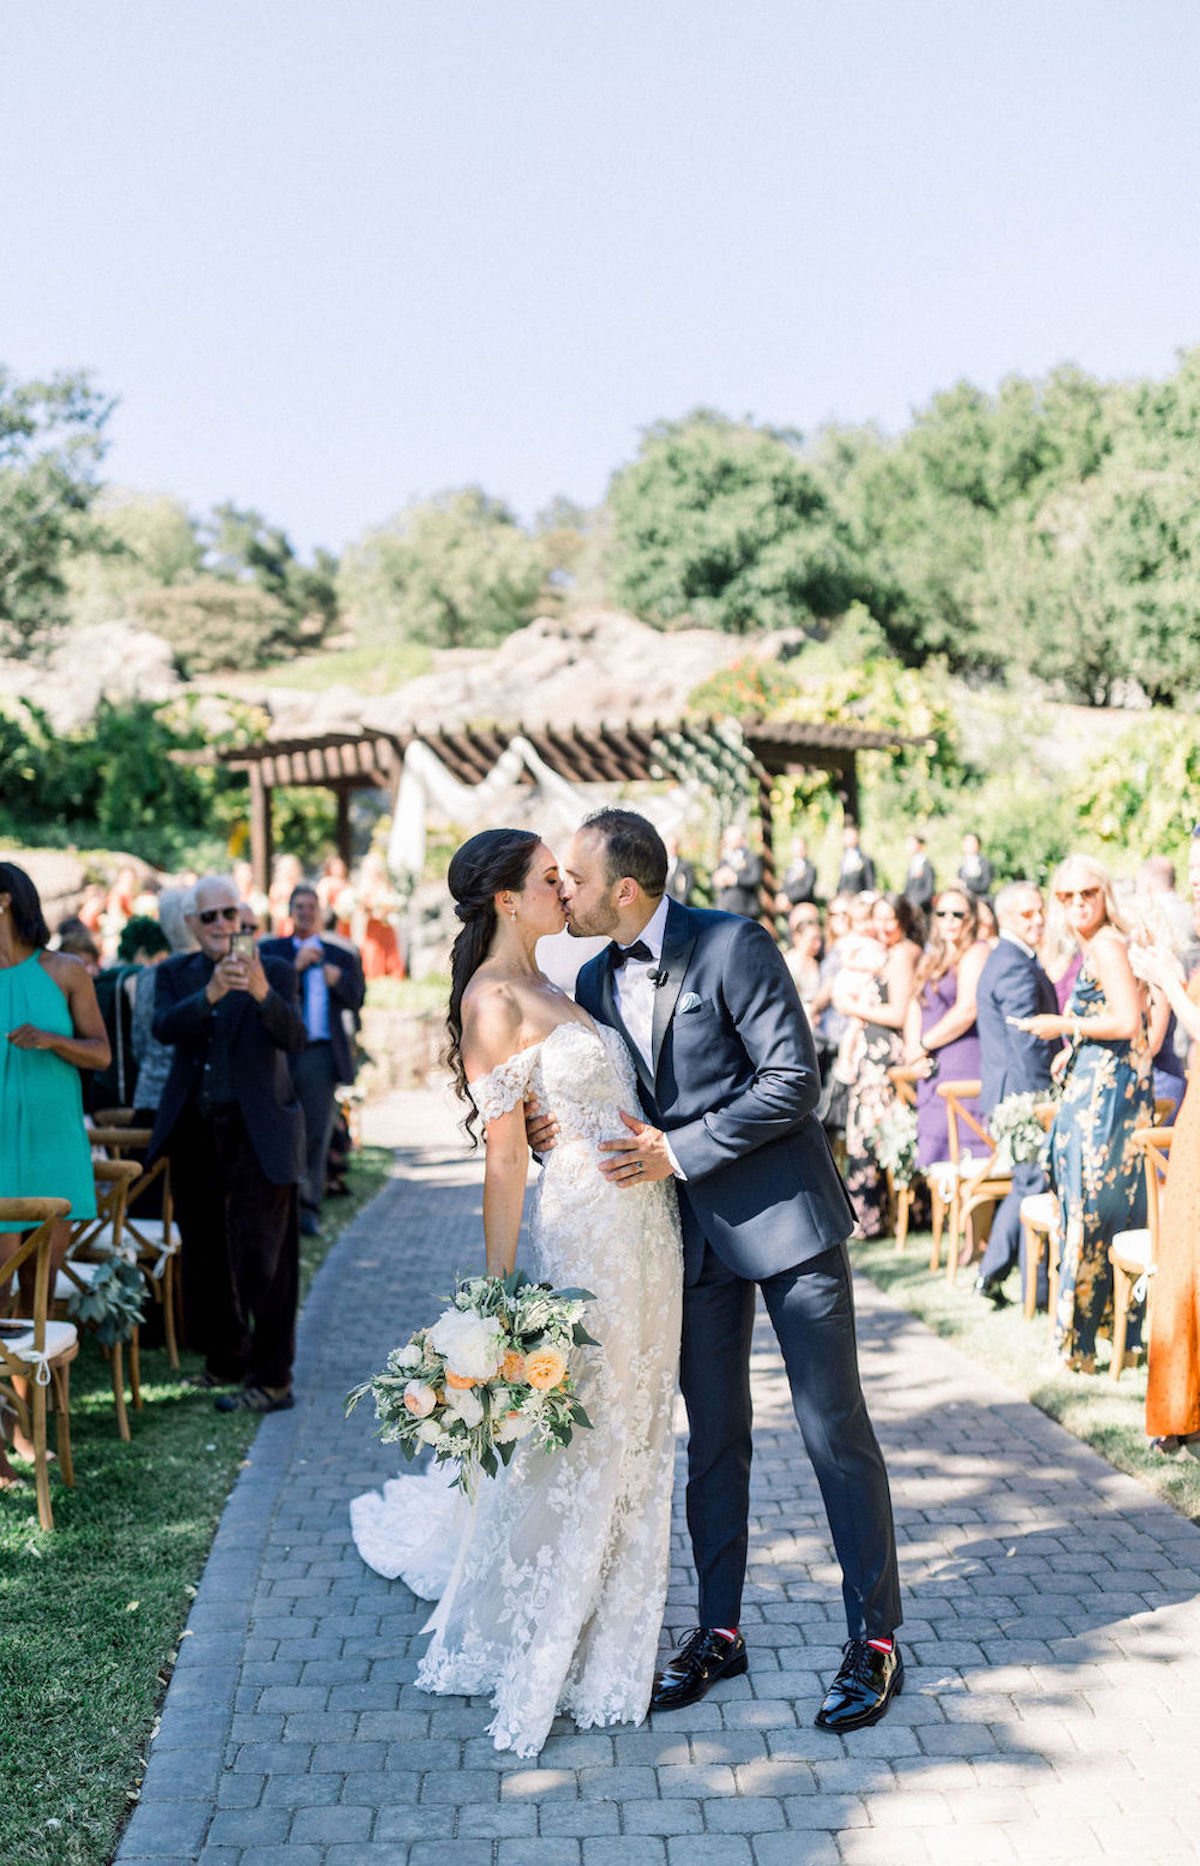 Rustic and Inviting Estate Wedding in California's Central Coast Hills